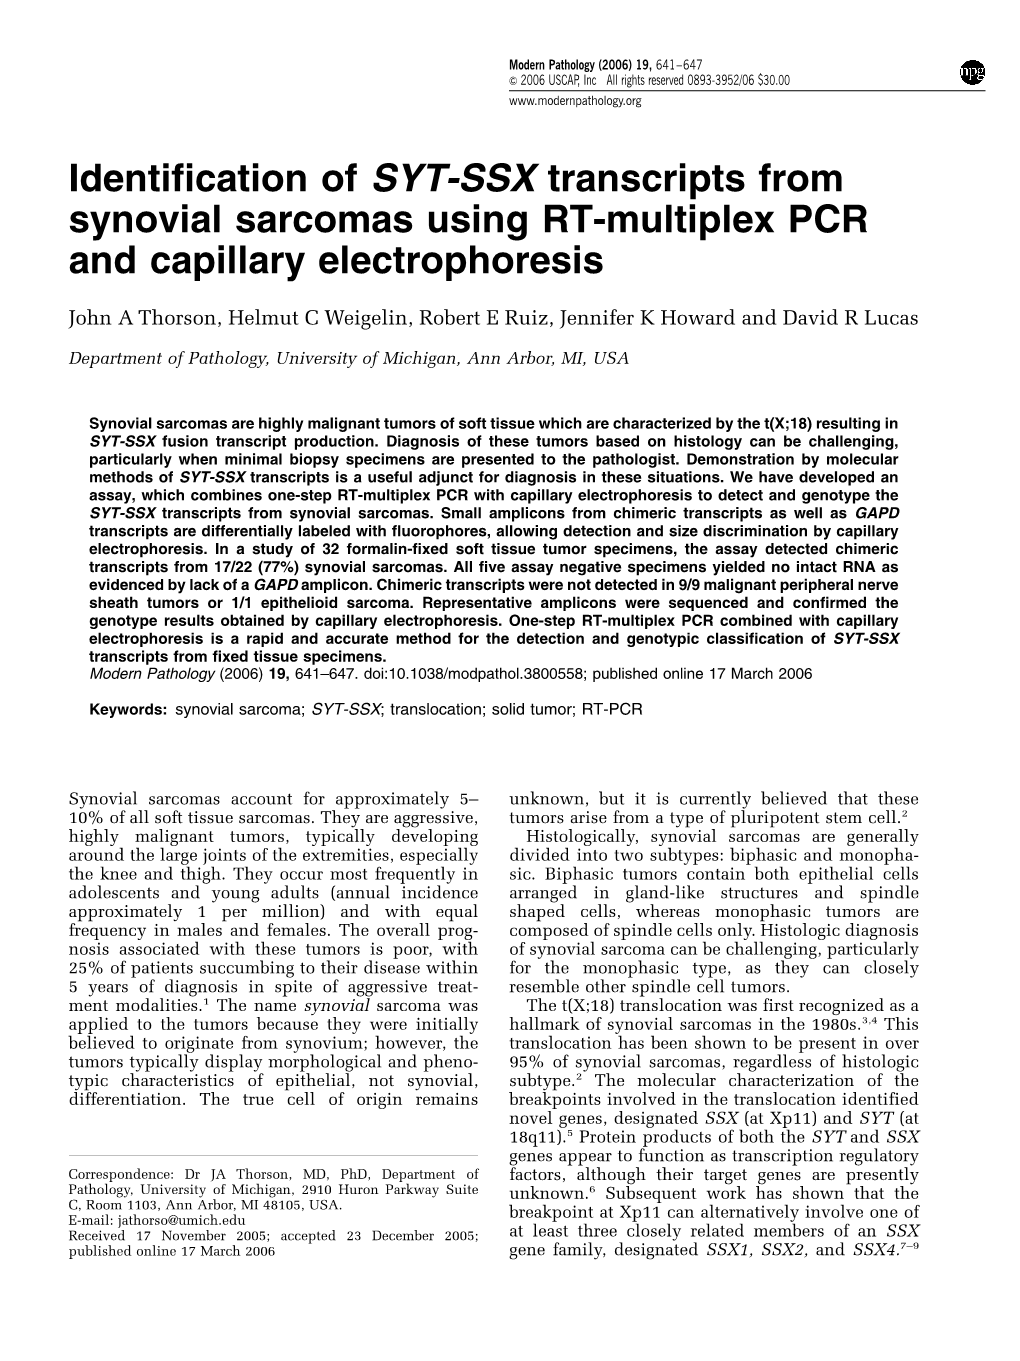 Identification of SYT-SSX Transcripts from Synovial Sarcomas Using RT-Multiplex PCR and Capillary Electrophoresis